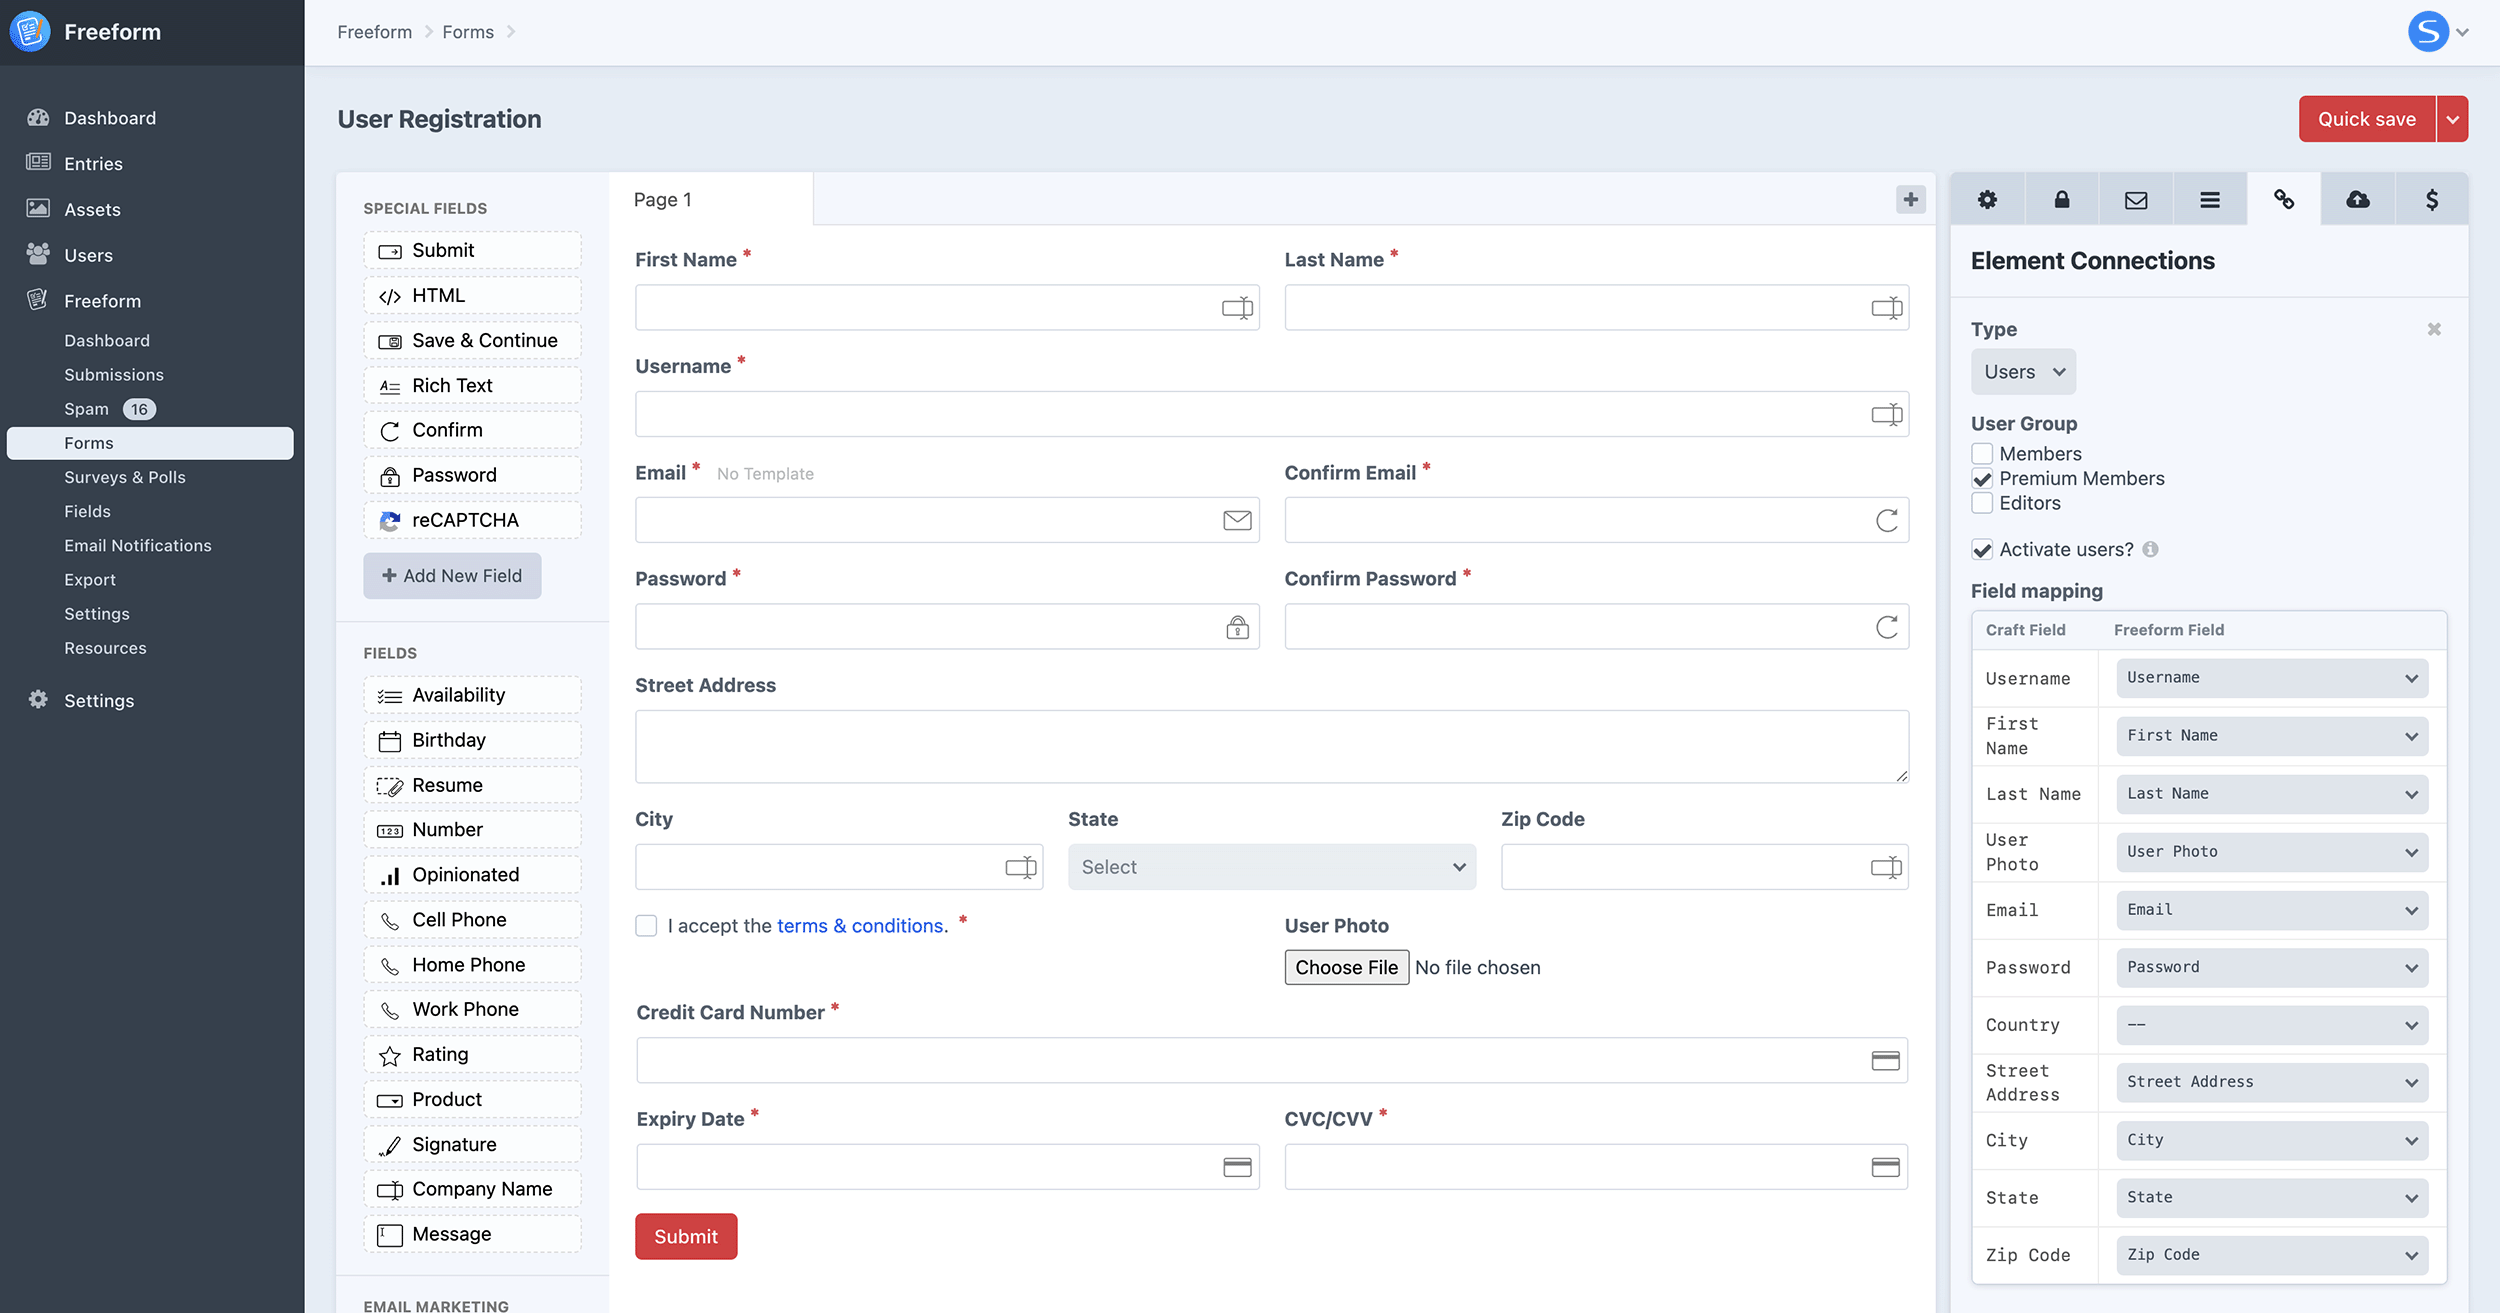 Send Submission Data to other Elements - User Registration form